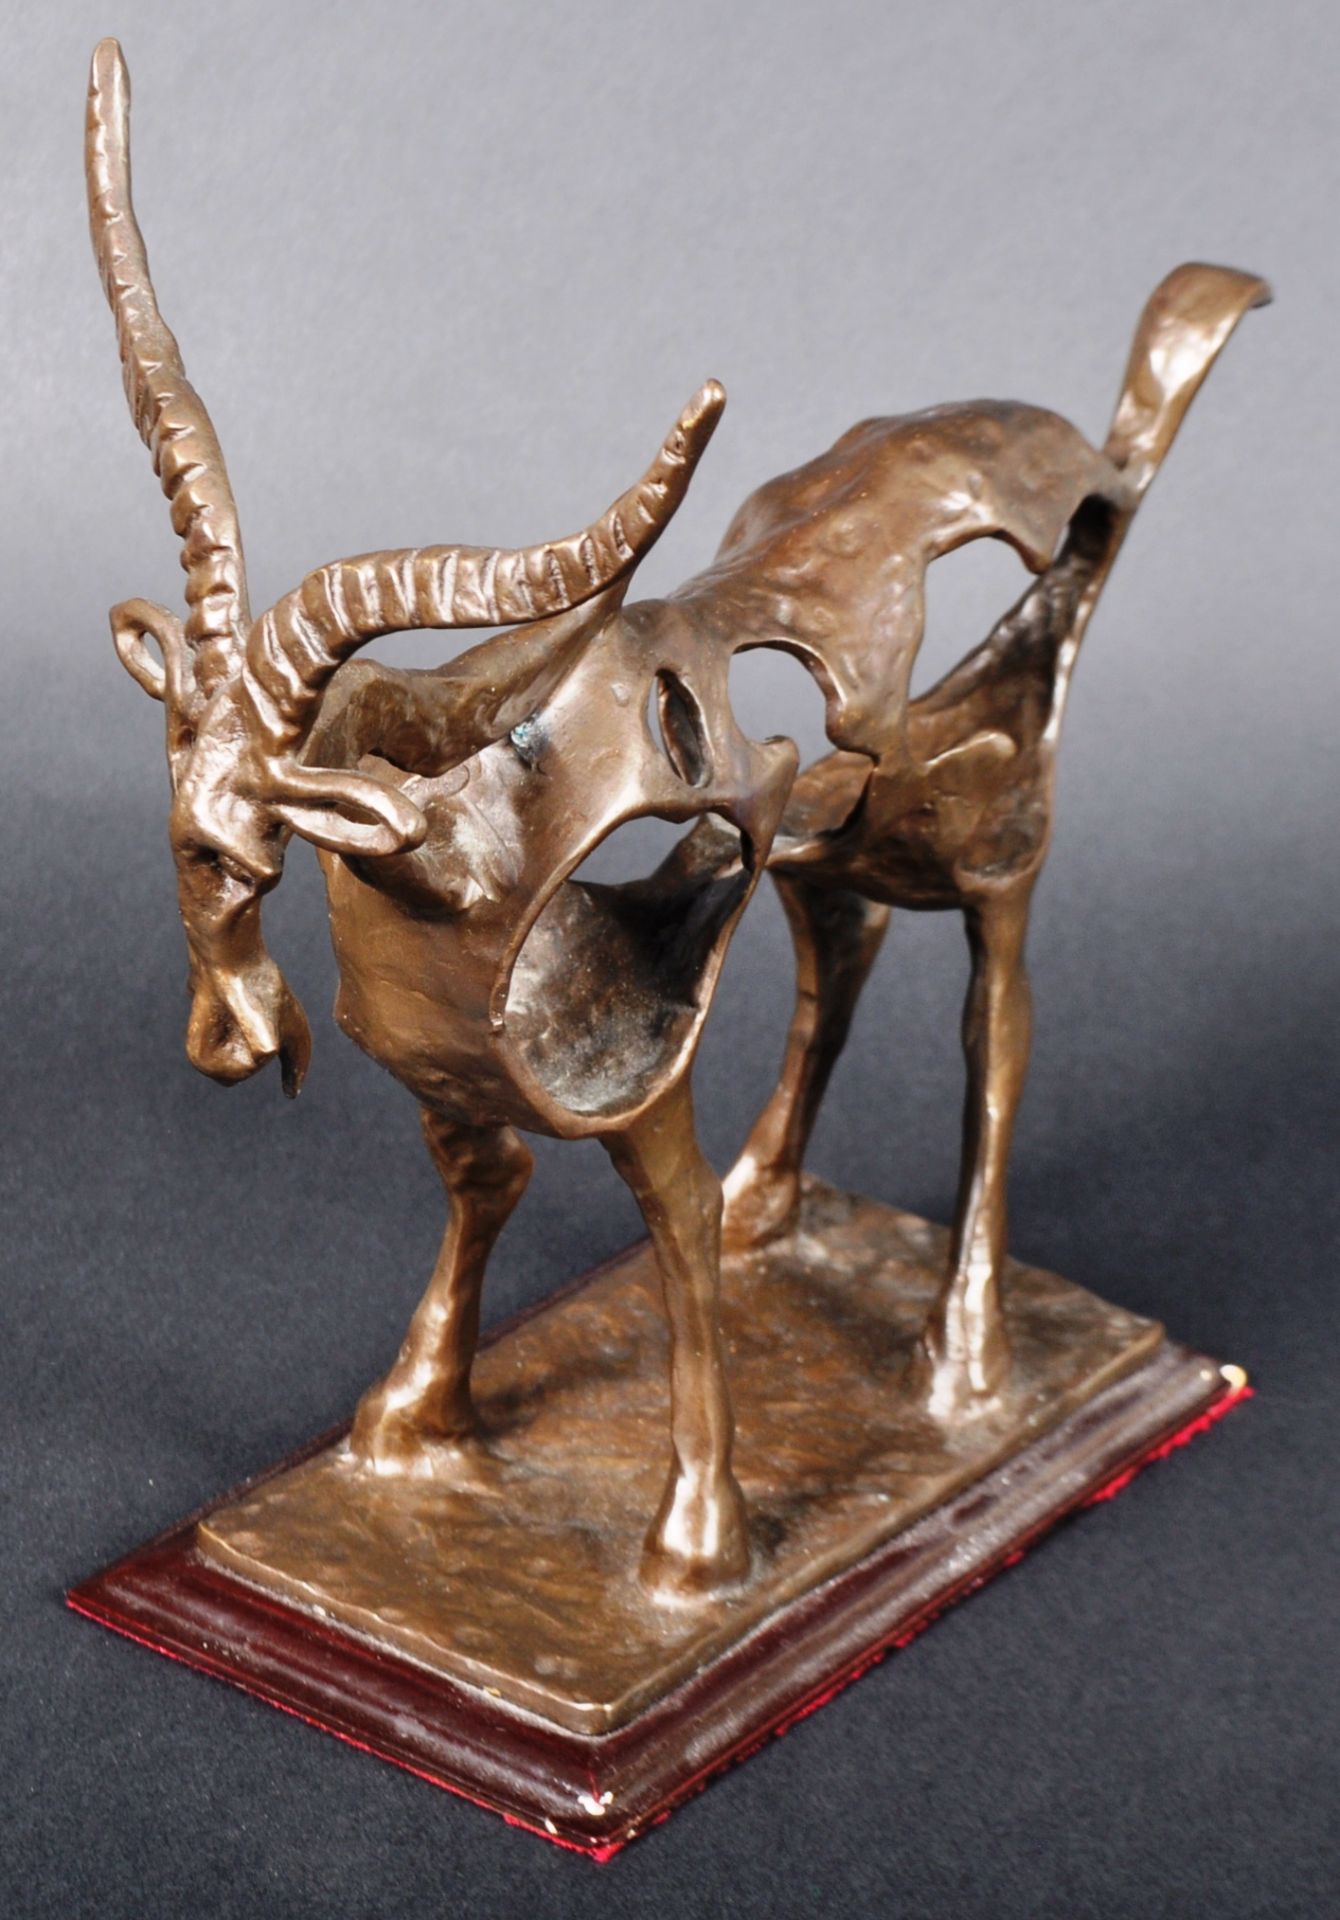 CONTEMPORARY BRONZE WORKED SCULPTURE OF AN ANTELOPE - Image 2 of 6